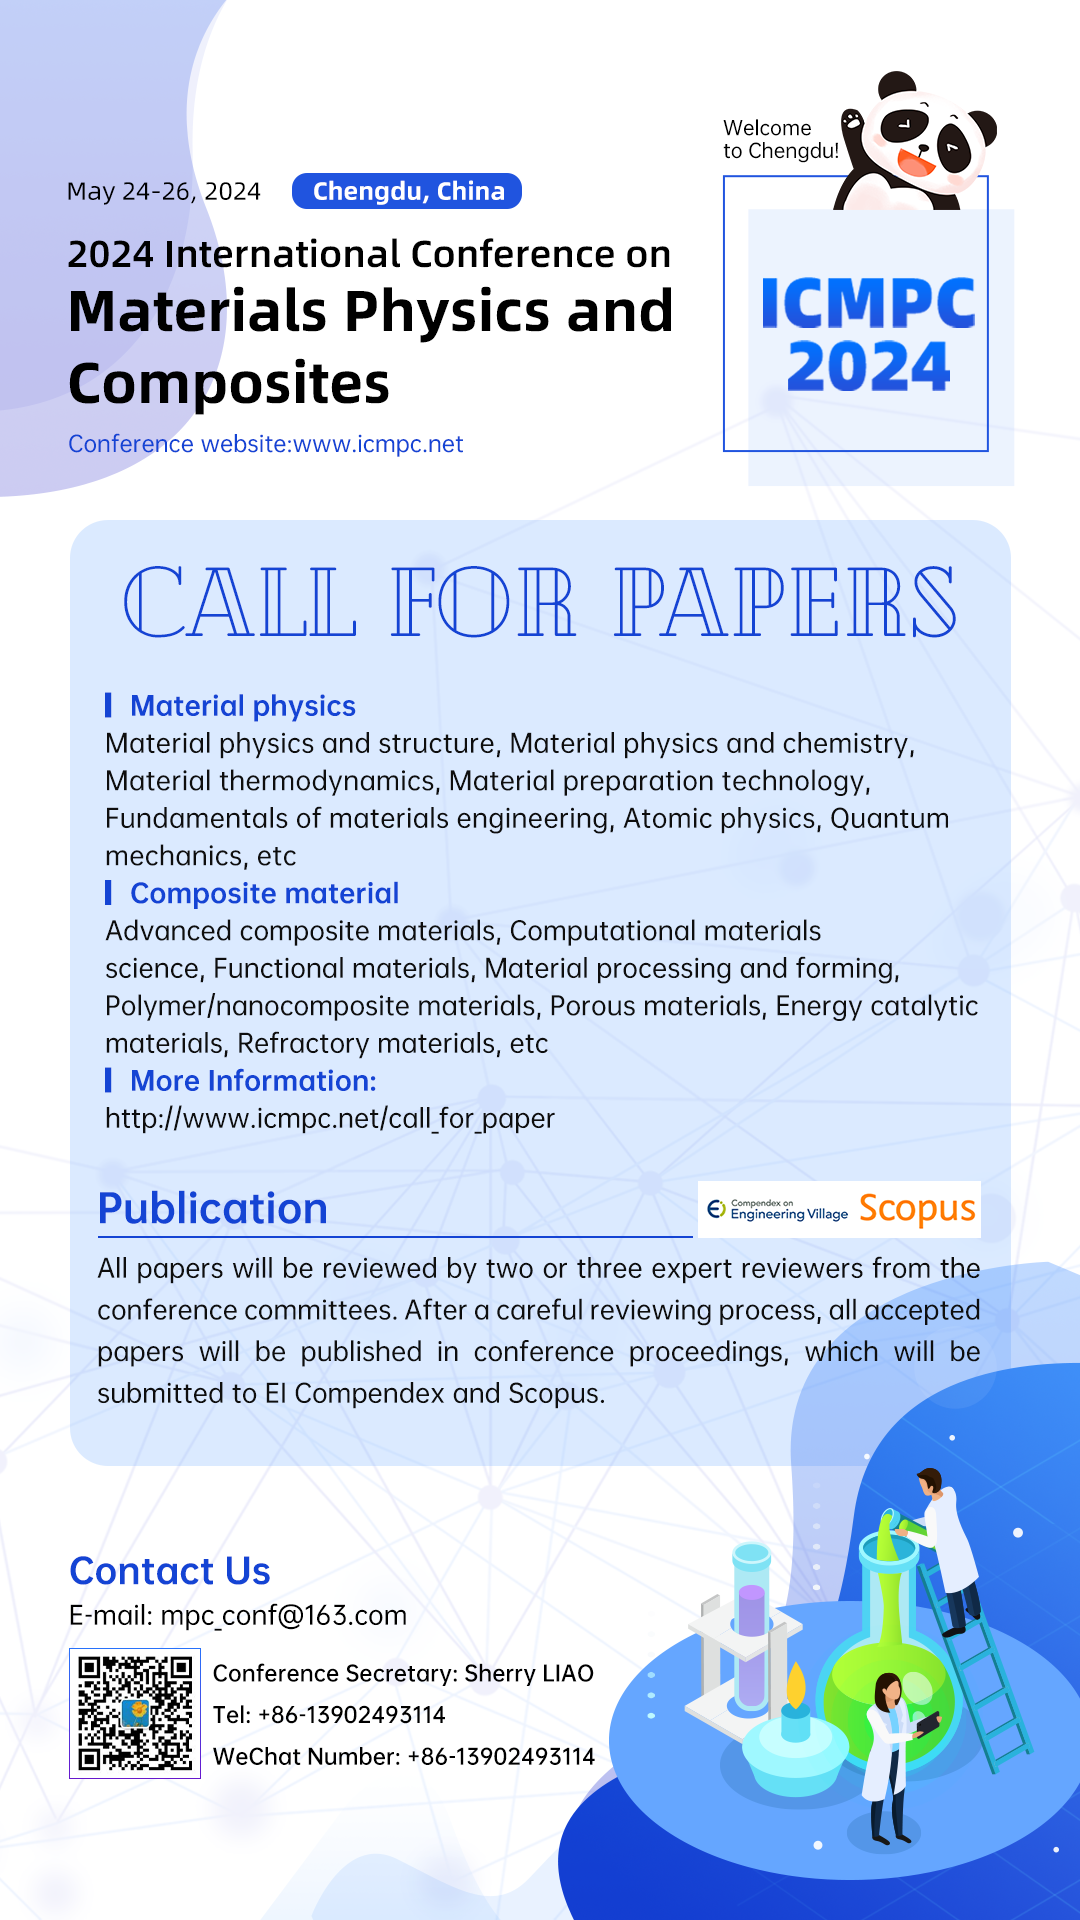 2024 International Conference on Materials Physics and Composites (ICMPC 2024), Chengdu, Sichuan, China